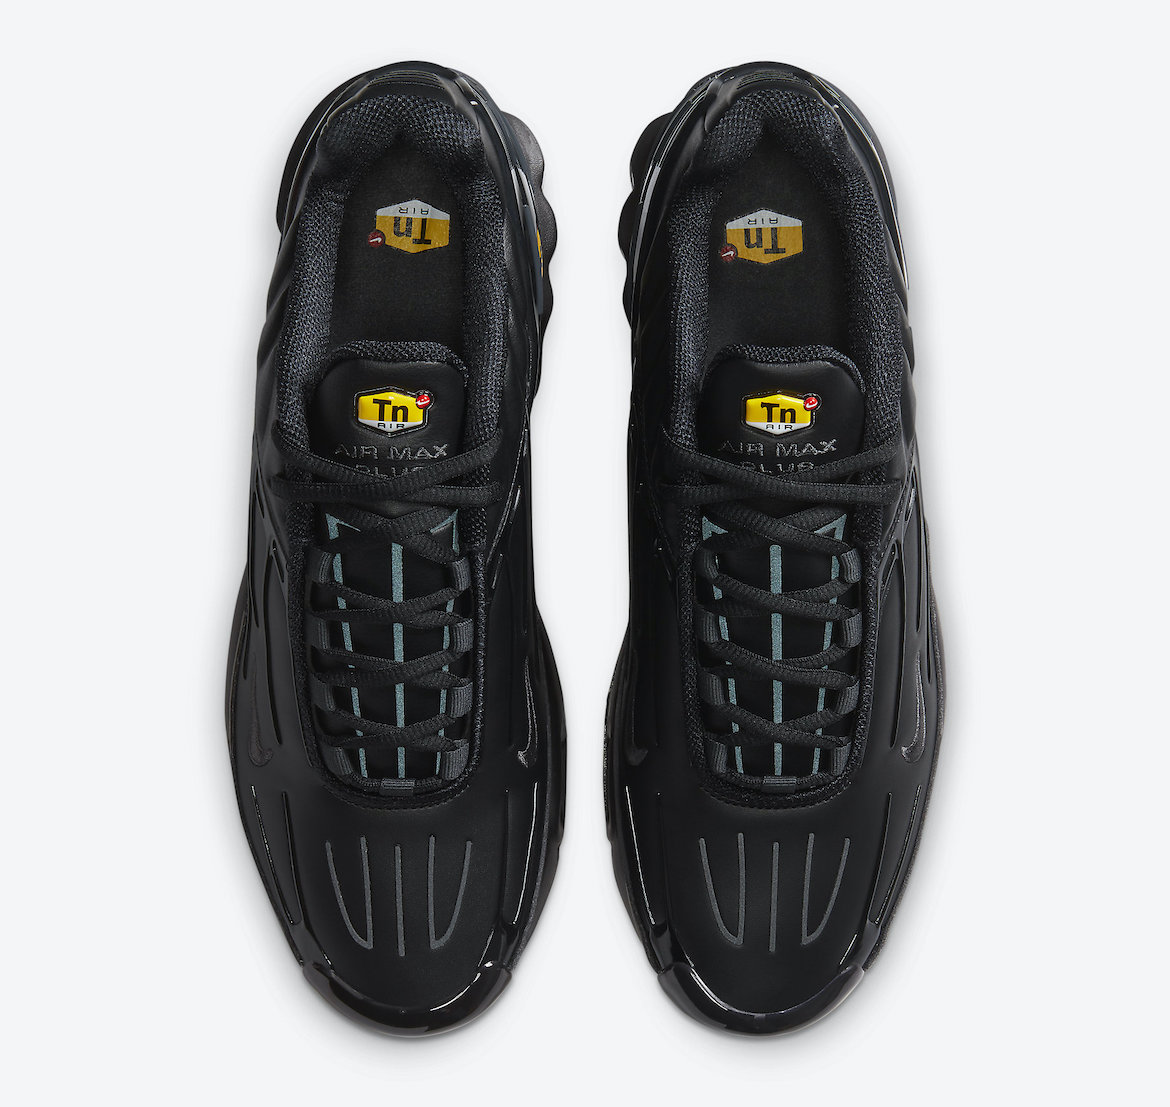 Nike Air Max Plus 3 Black Leather CK6716-001 Release Date - SBD